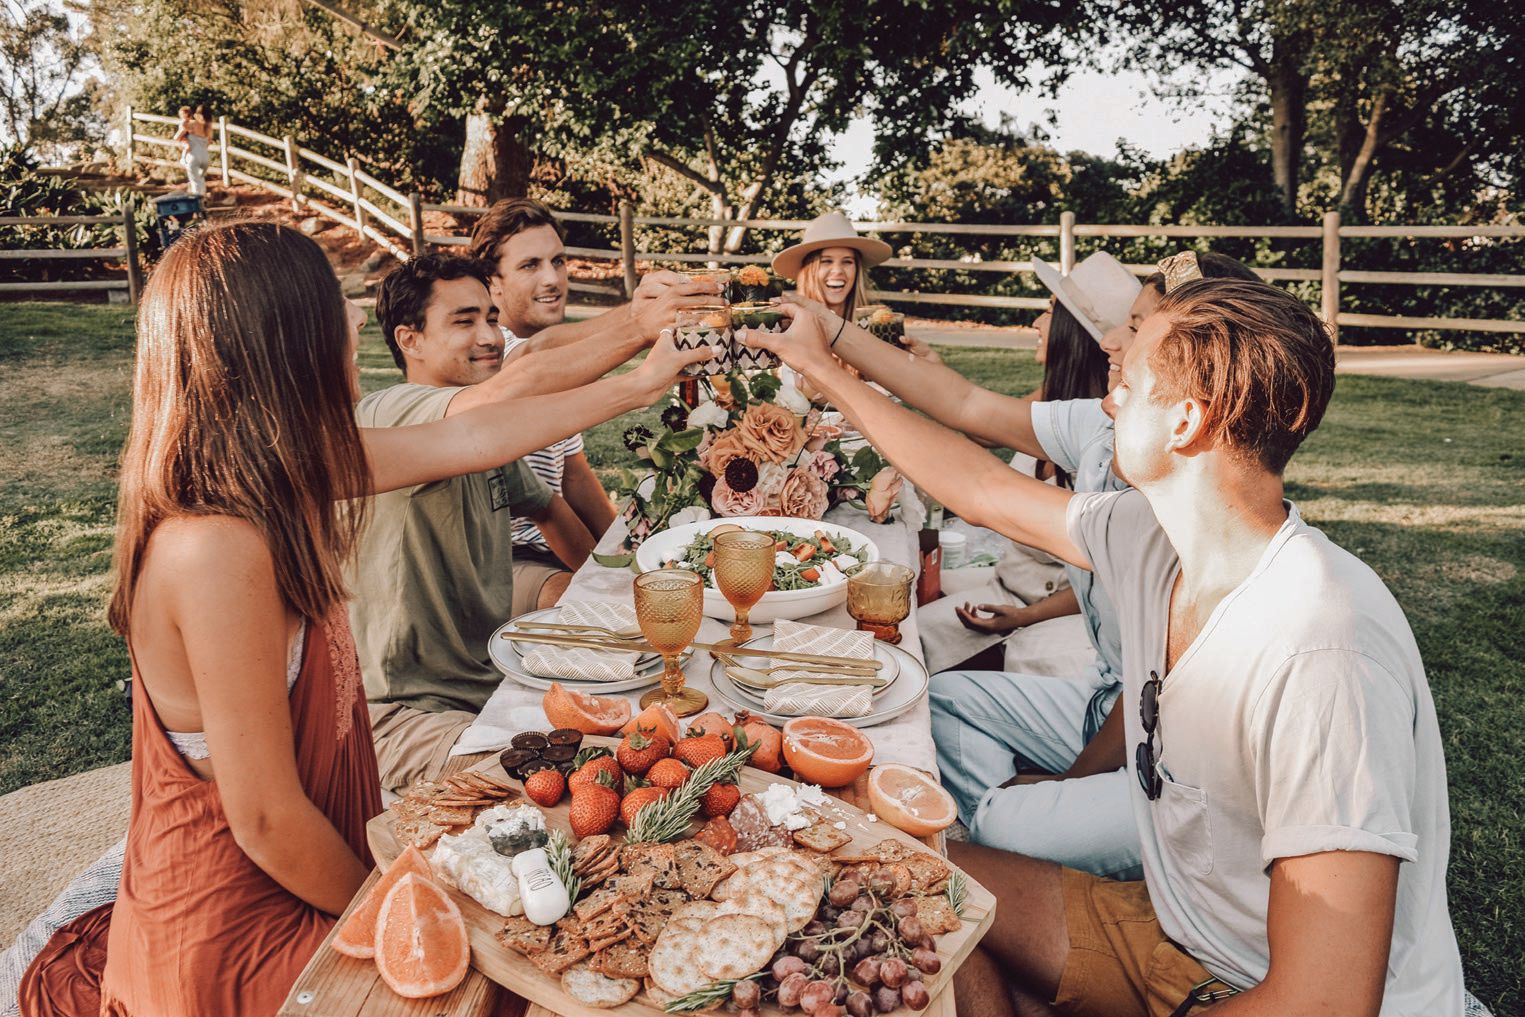 Whether you’re celebrating a momentous occasion or just having a luxe picnic with friends, Jersey Shore Picnic Co. provides everything from charcuterie to tabletop games. and more. PHOTO: BY NICOLE HERRERO/UNSPLASH